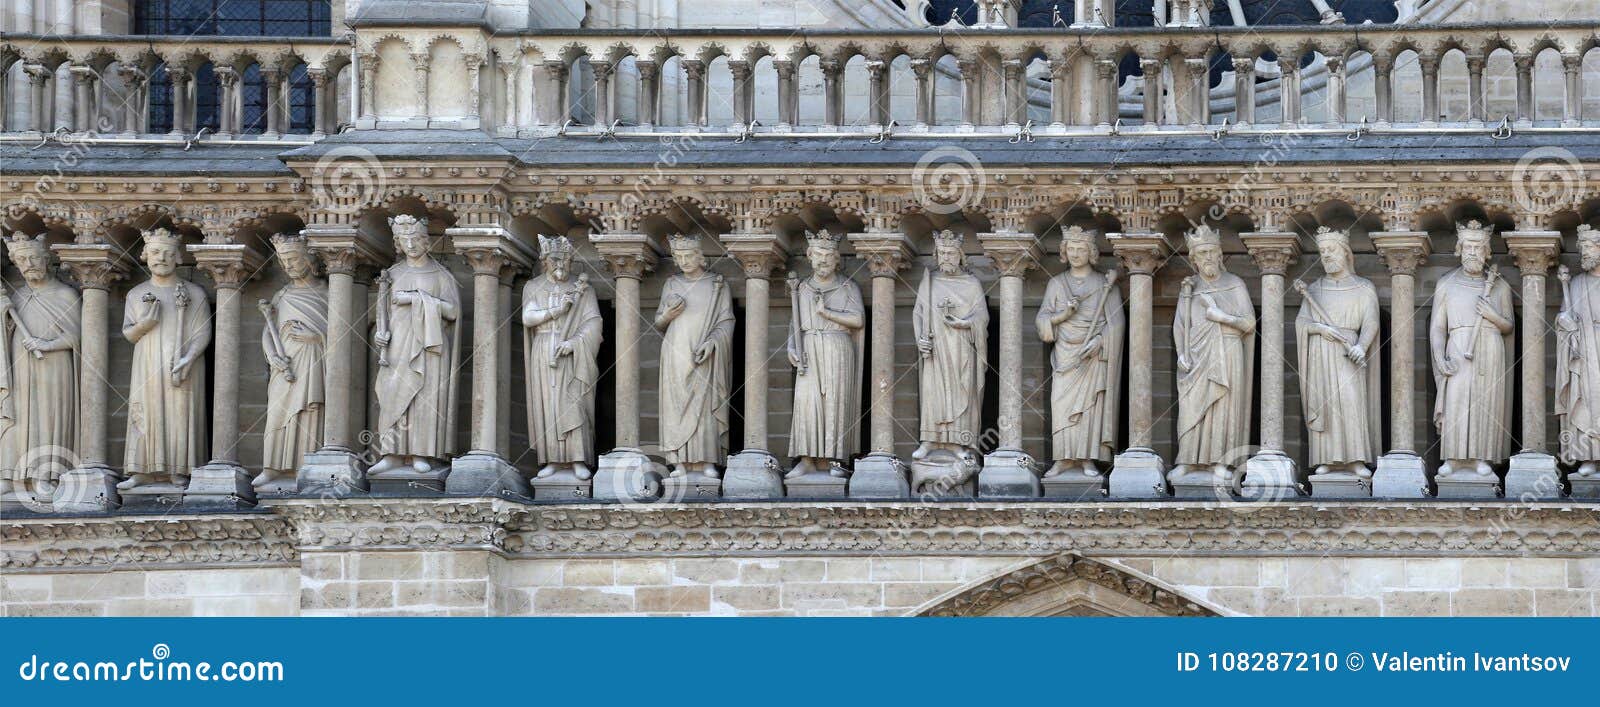 a fragment of the gallery of old testament kings on the faÃÂ§ade of notre dame cathedral.